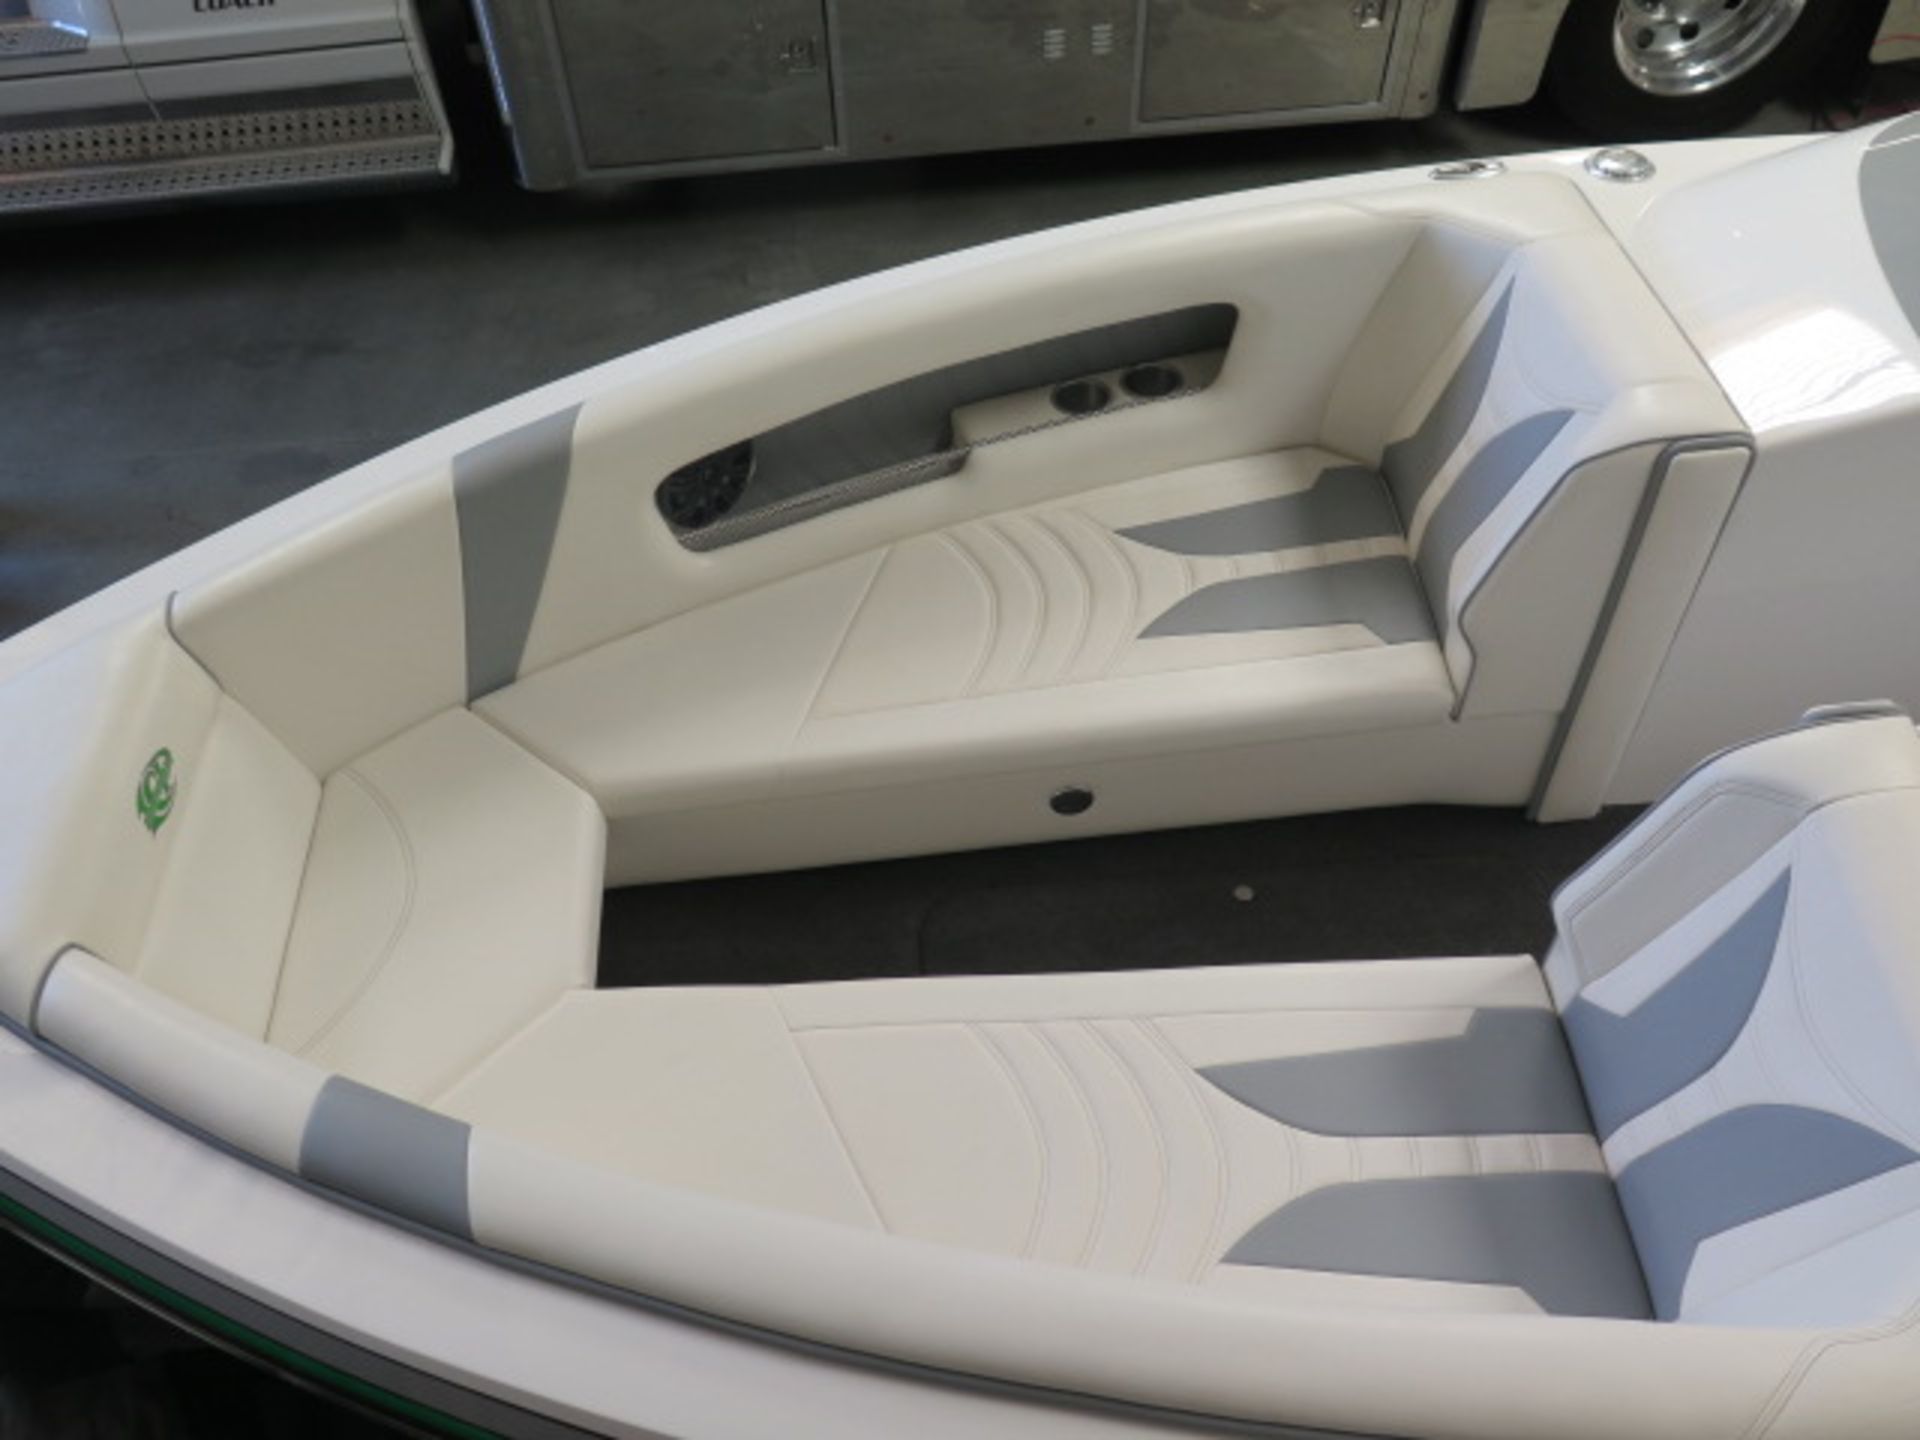 2020 Laveycraft 24' V-Bottom Open Bow Boat w/ Custon Martinez Interior, Boostpower 675Hp, SOLD AS IS - Image 12 of 40